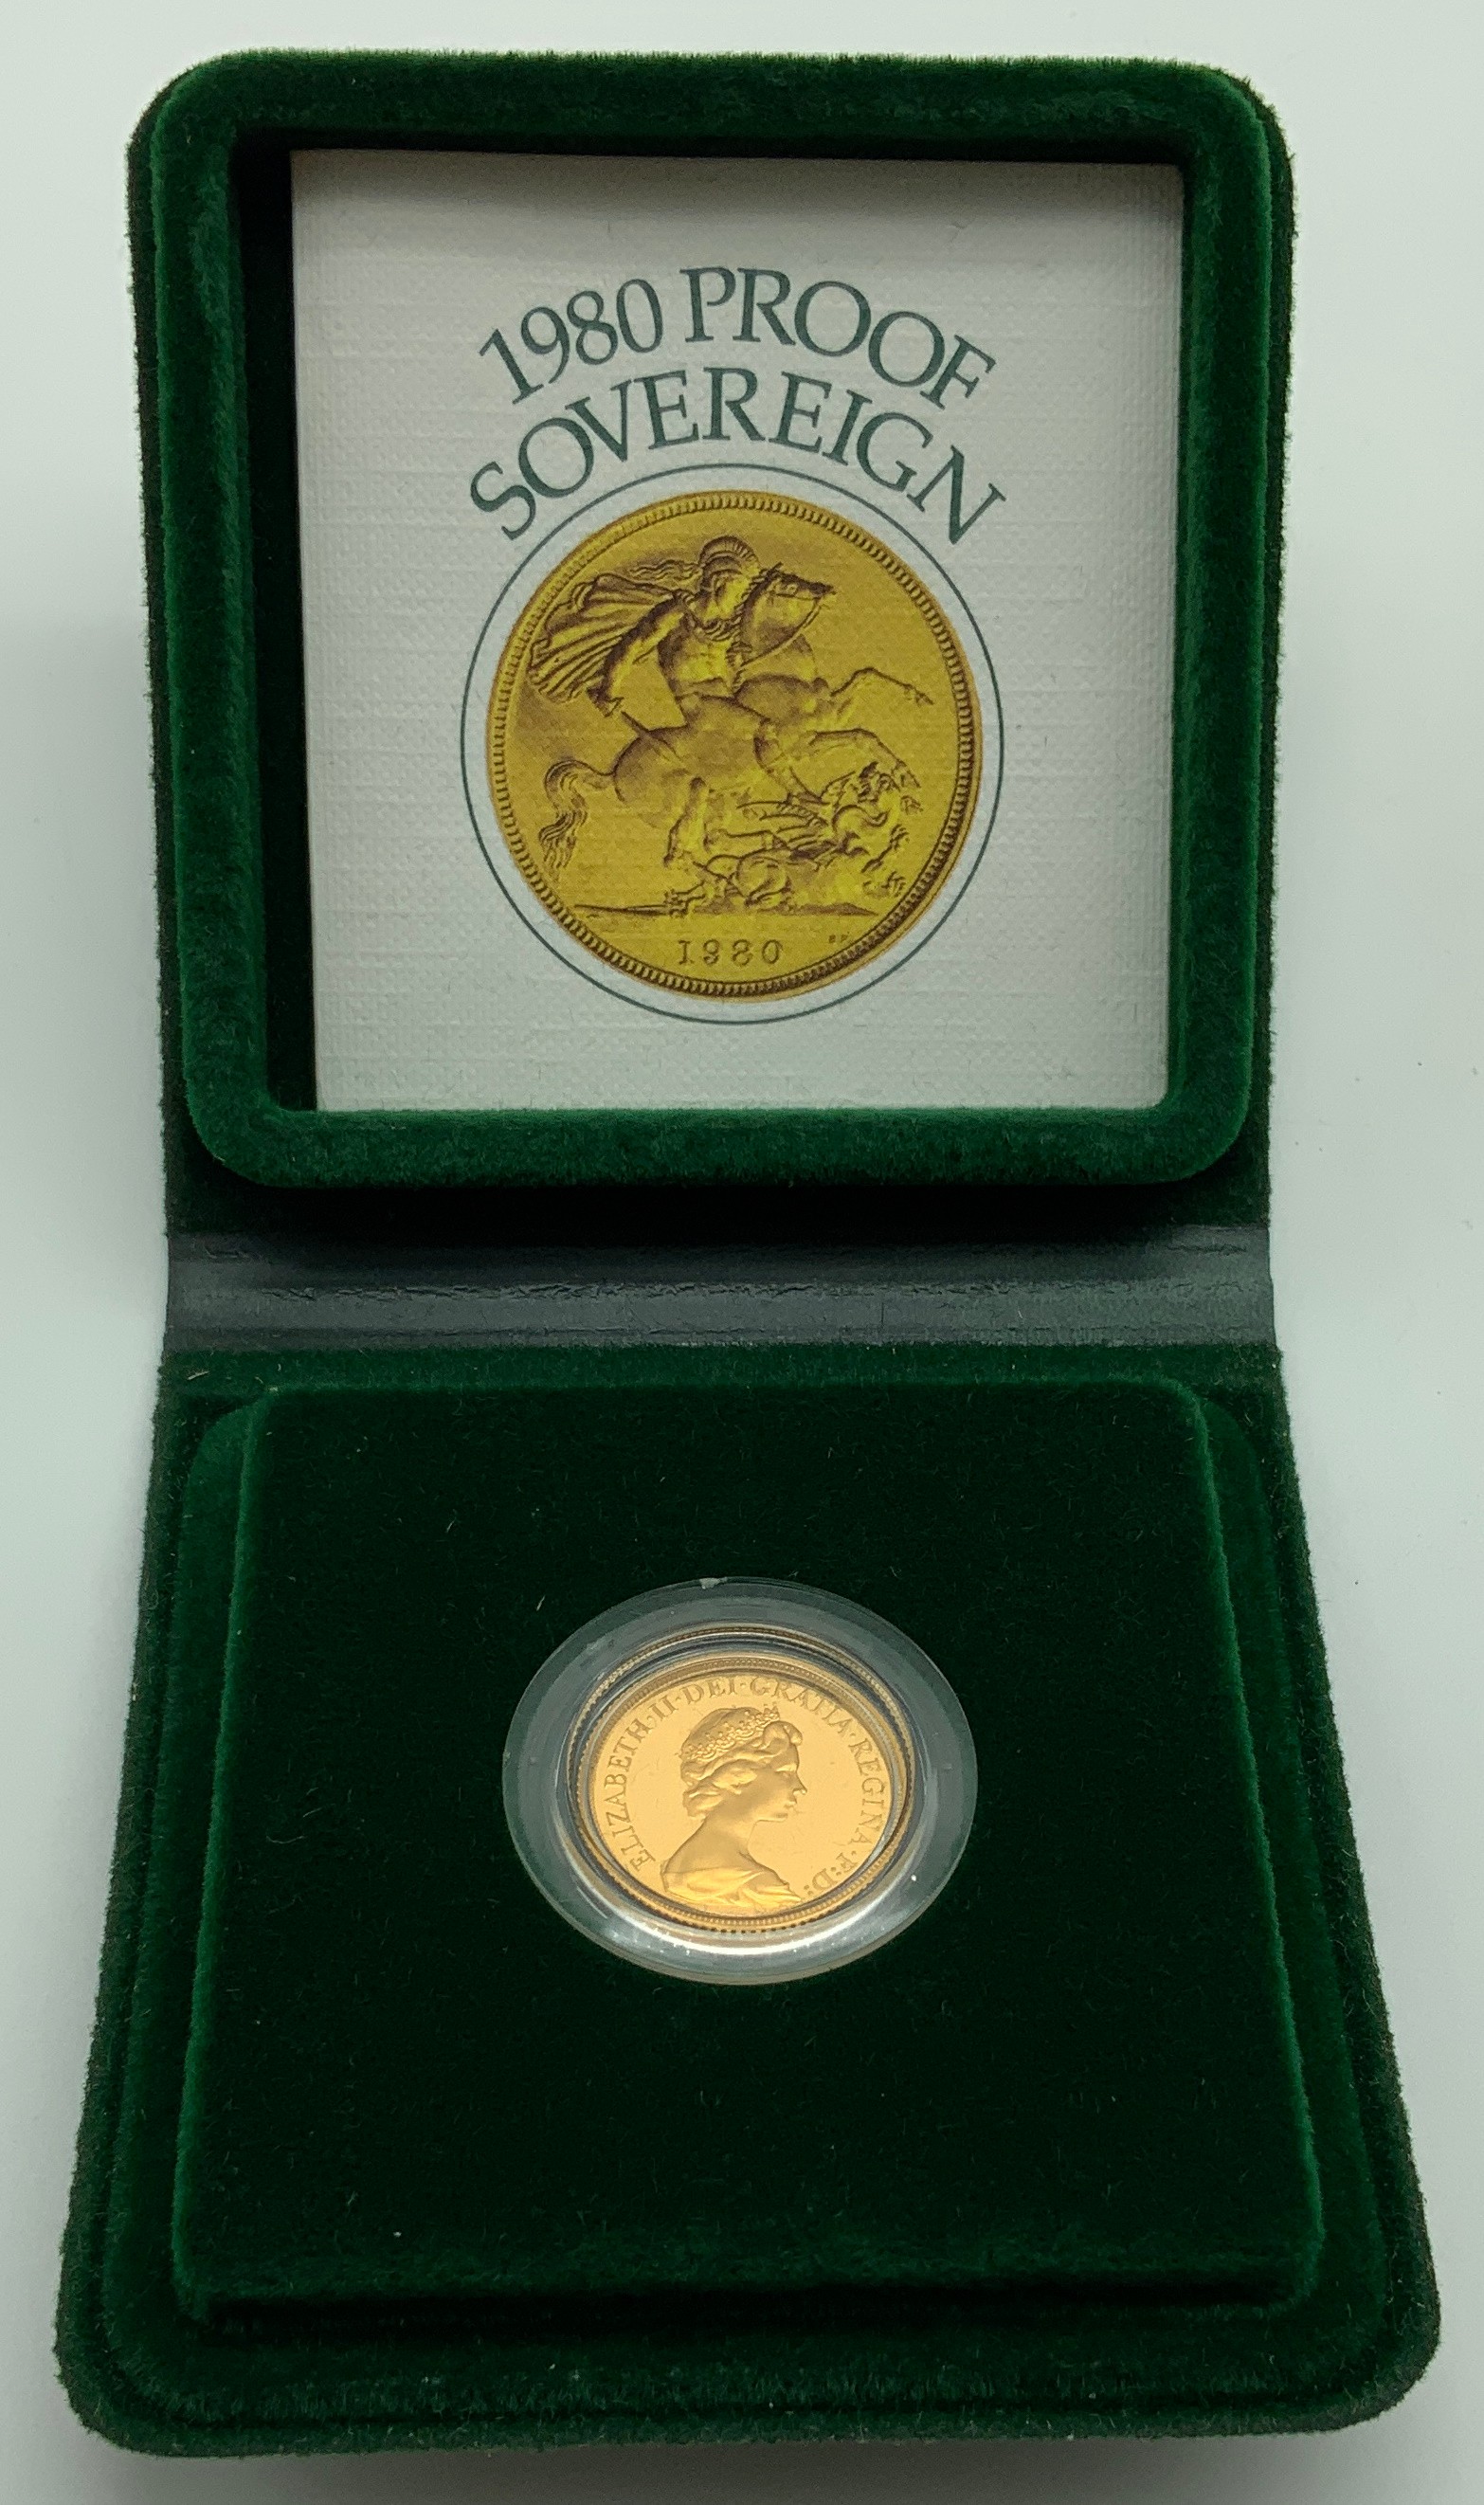 1980 ROYAL MINT GOLD PROOF FULL SOVEREIGN COIN - Image 2 of 3